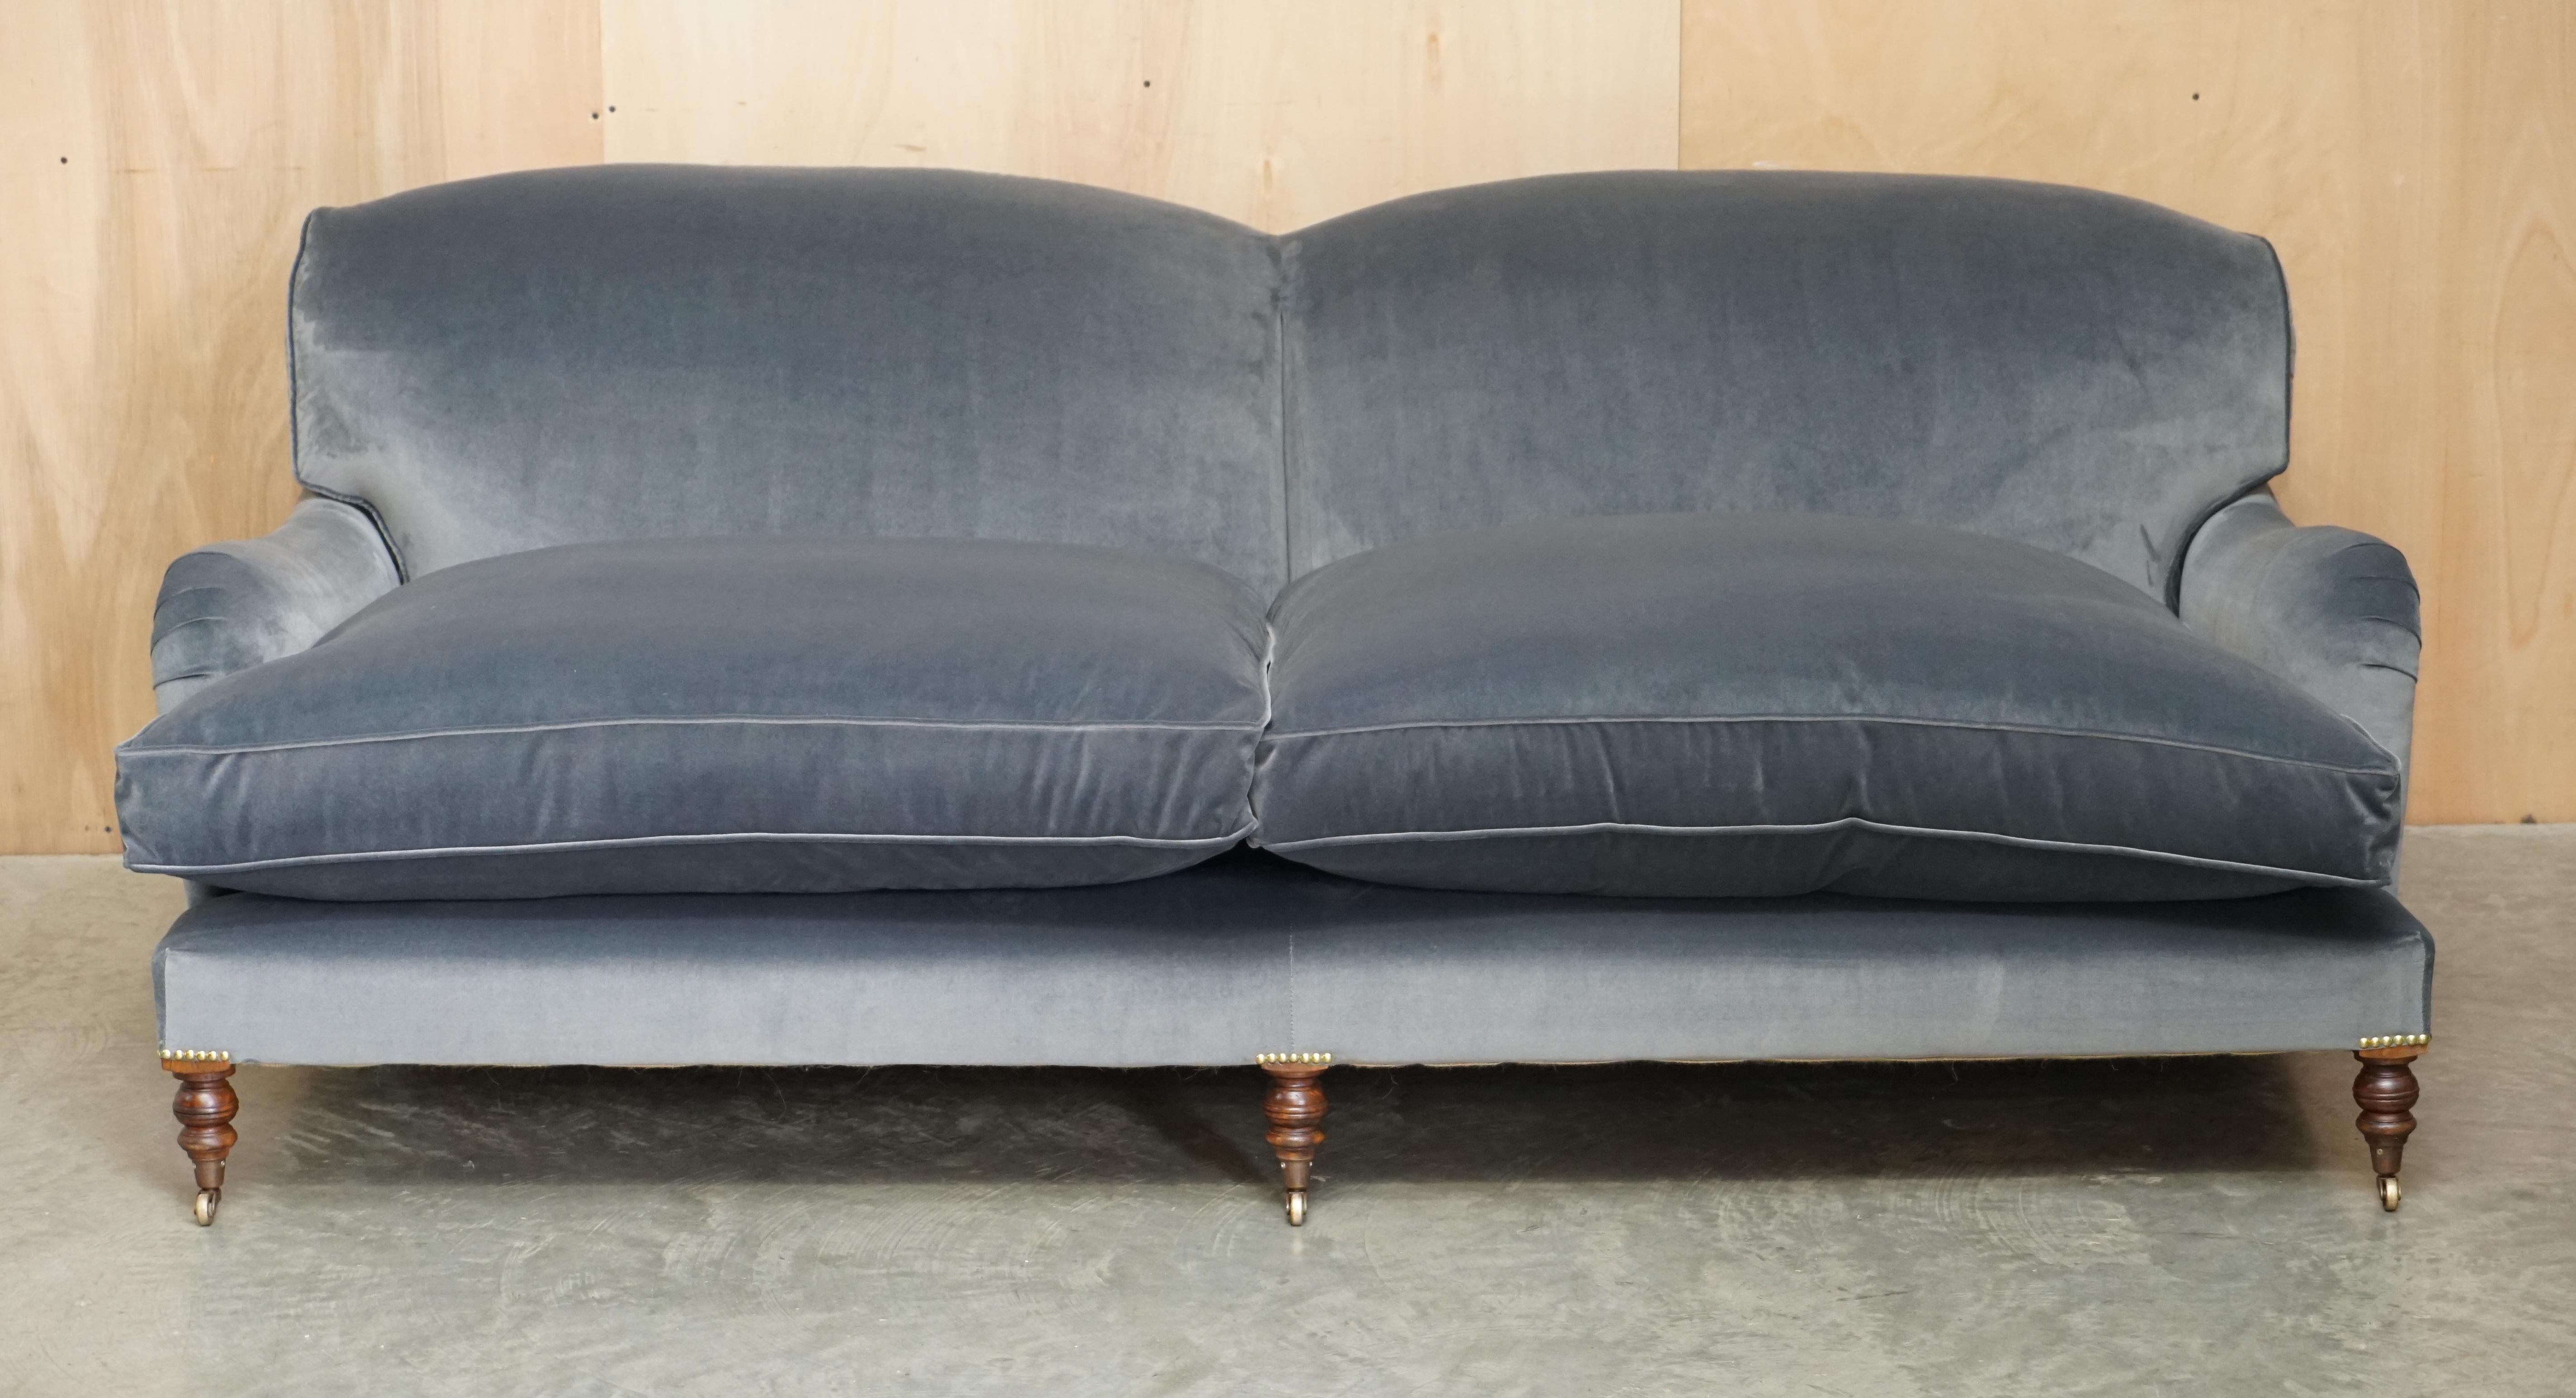 We are delighted to offer for sale this brand new, extra deep, George Smith Signature Scroll Arm large sofa with feather filled base cushions upholstered with the exceptionally luxury grey velvet

Please note the delivery fee listed is just a